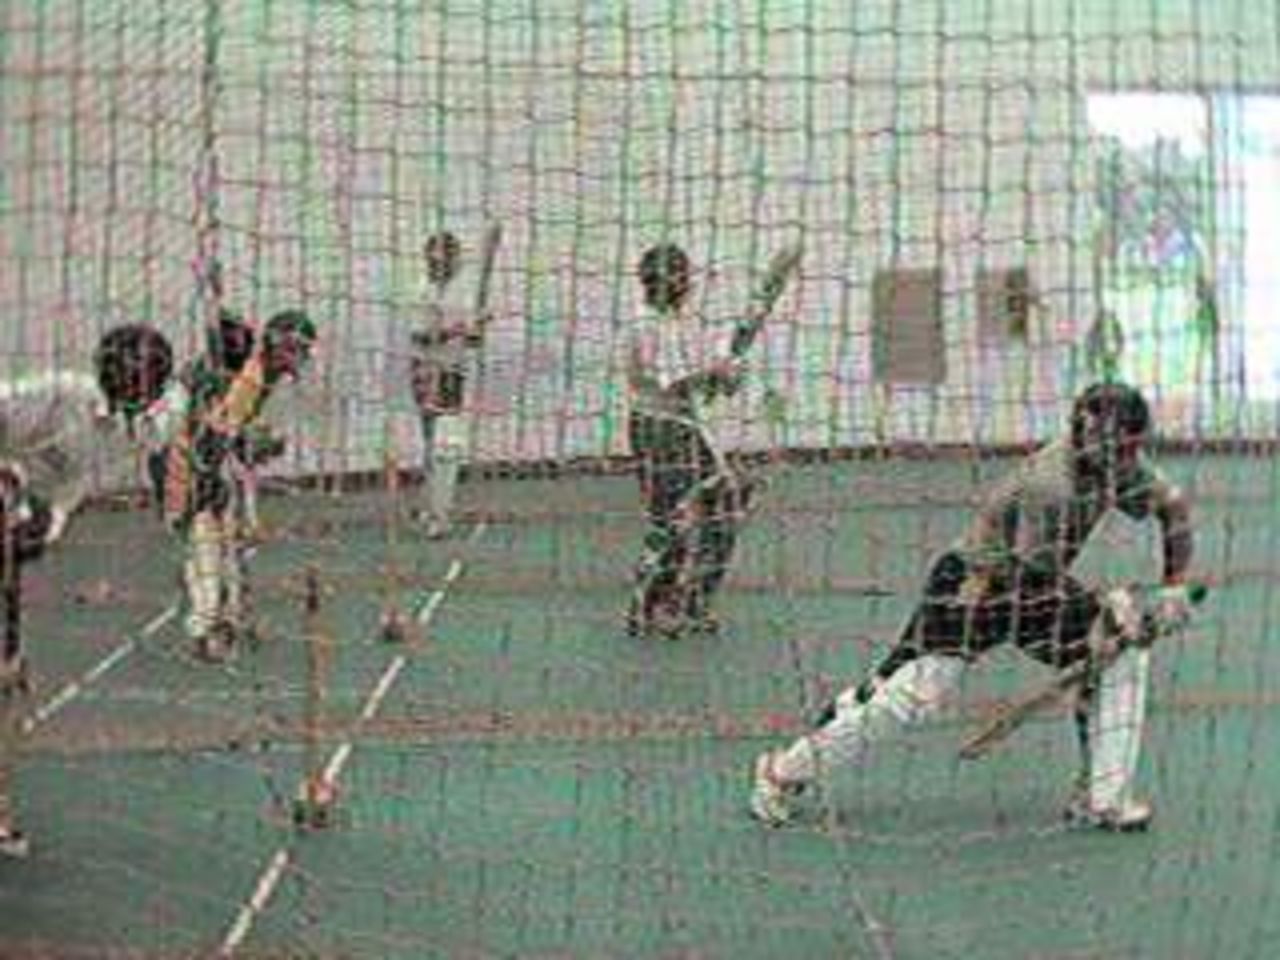 National team is practicing indoor for the next Test match at Multan